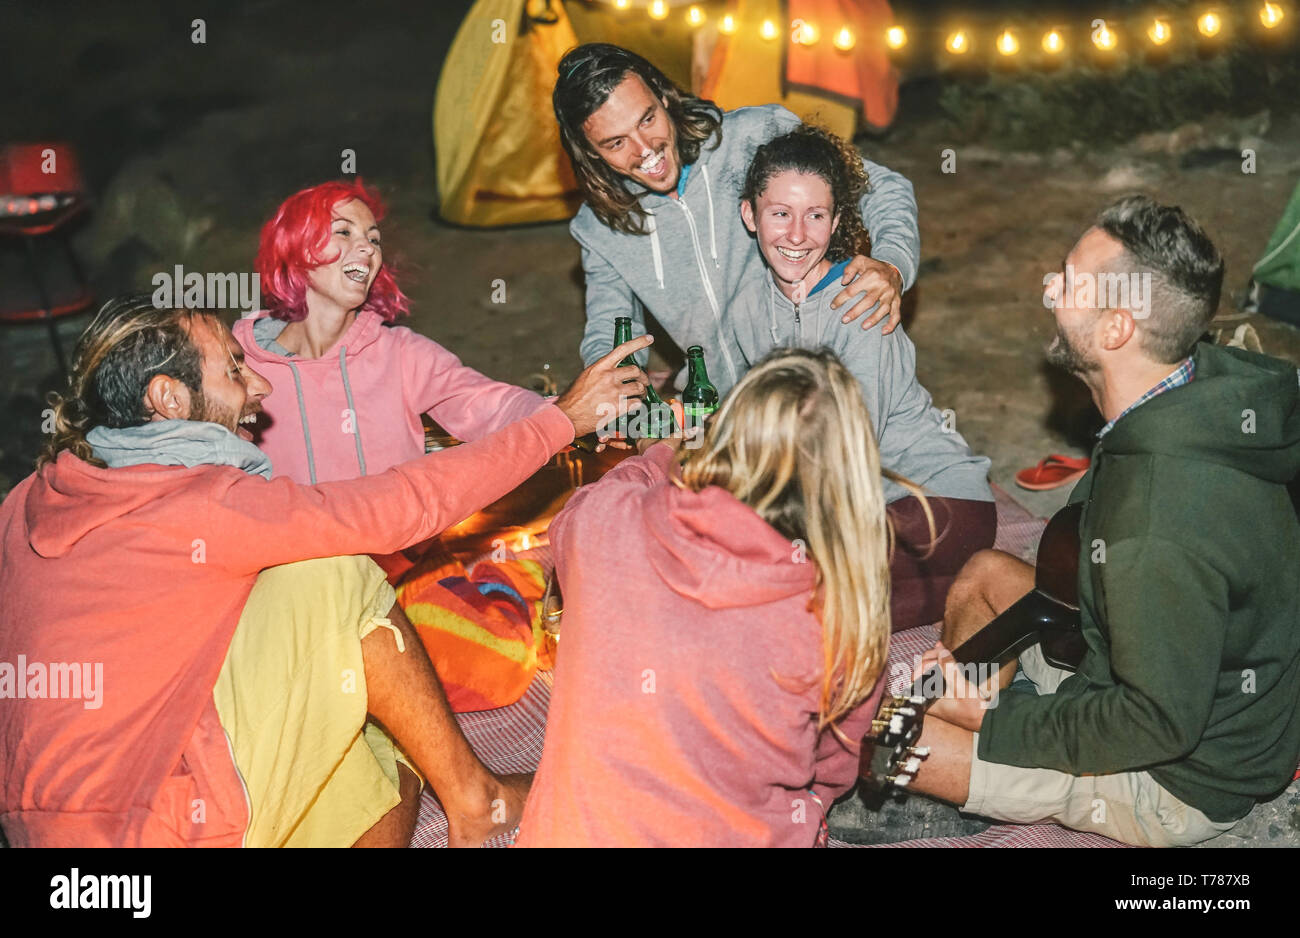 Group of friends having fun cheering with beers on the beach with tent at night - Happy young people playing guitar and laughing together Stock Photo